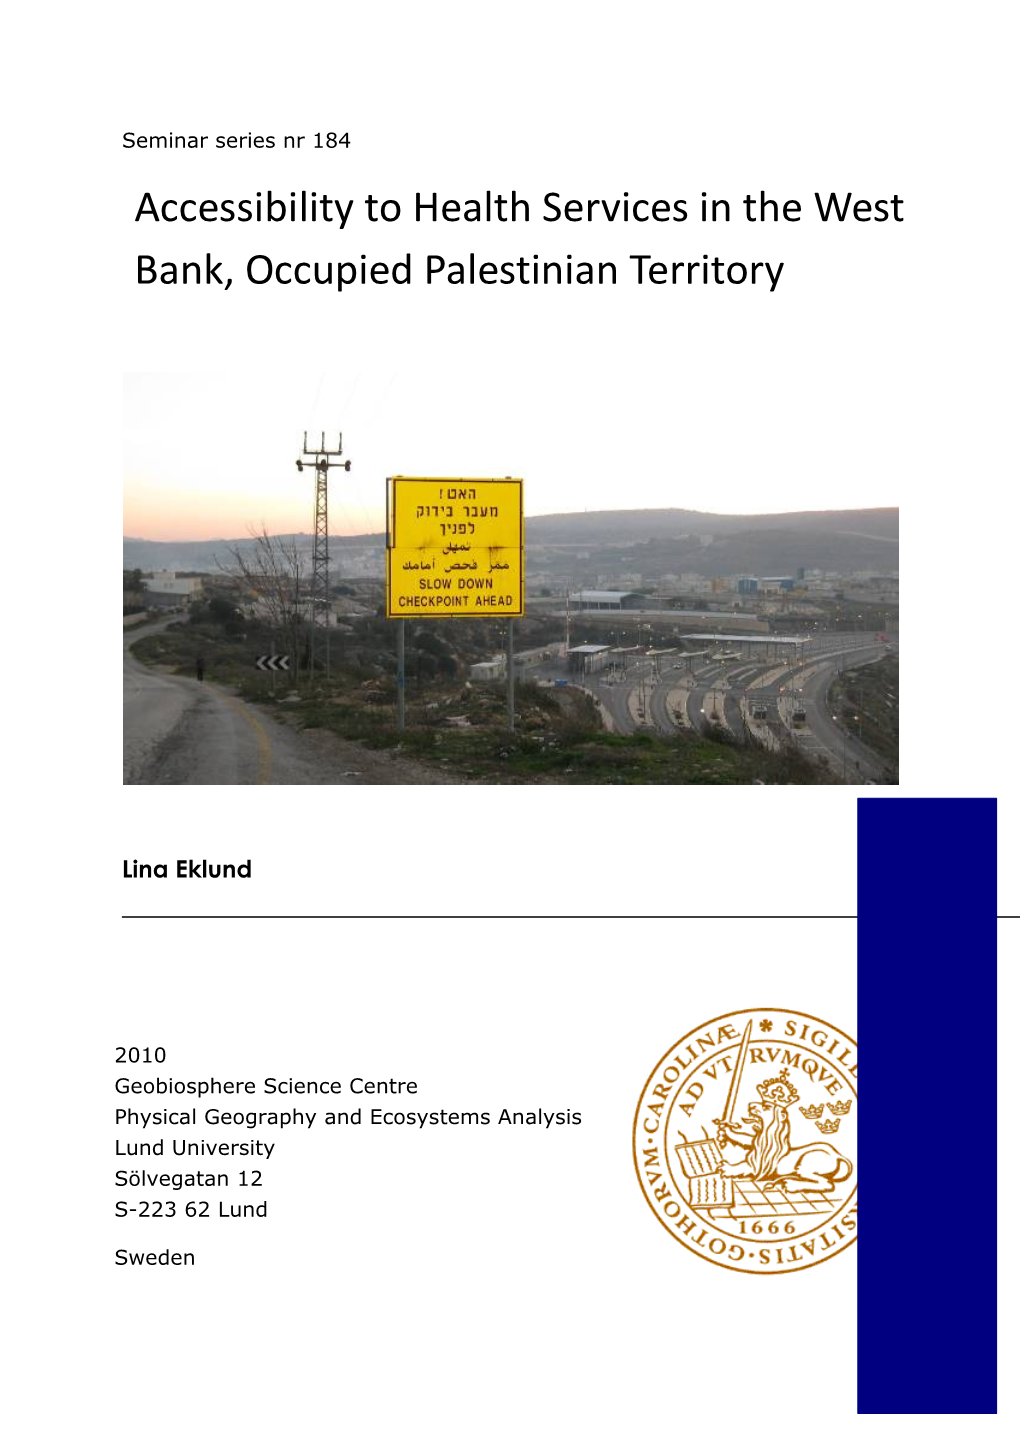 Accessibility to Health Services in the West Bank, Occupied Palestinian Territory